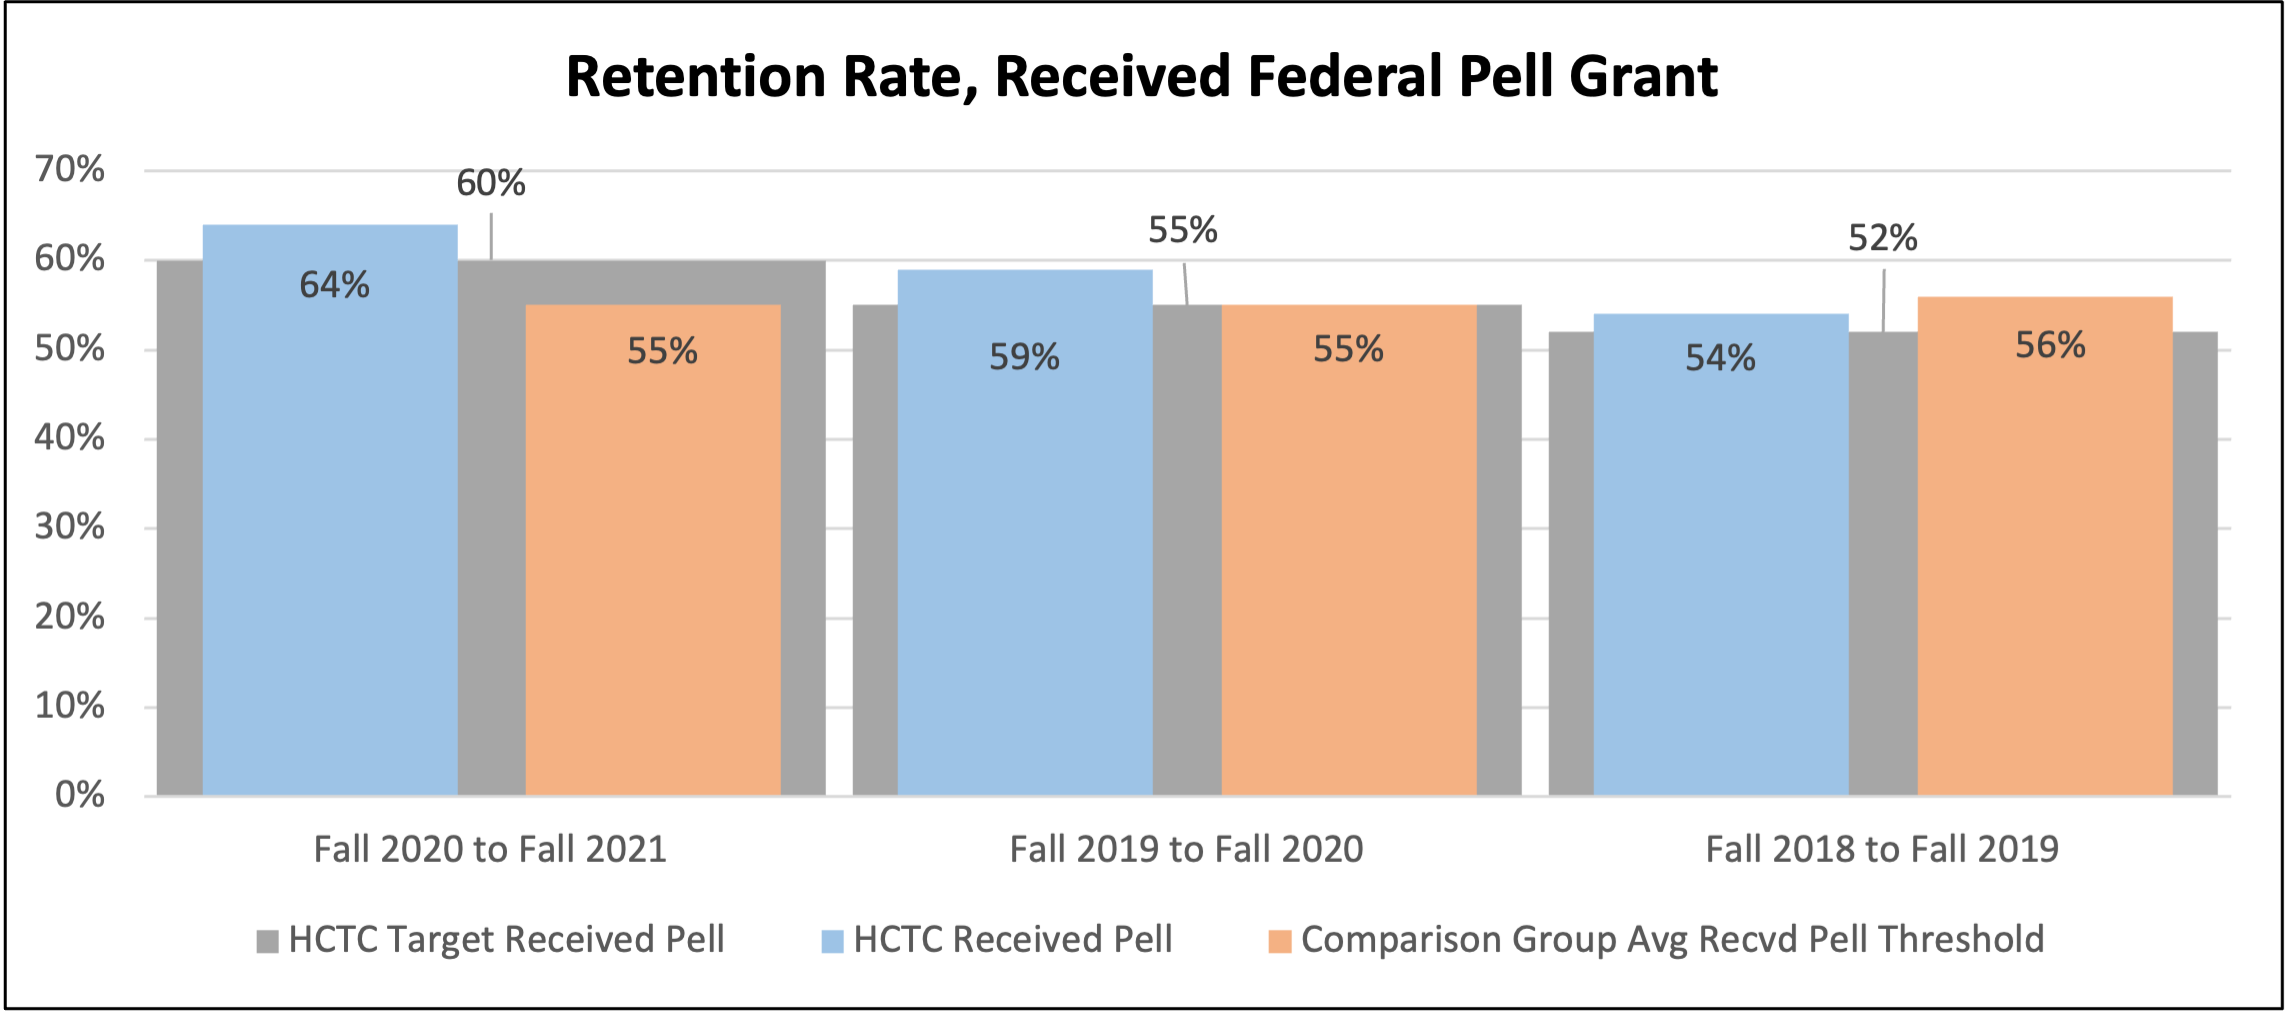 Retention Rate Received Pell vs. Not Receive Pell: Measured by the percentage of first-time credential-seeking students from the previous summer/fall who either re-enrolled or successfully completed their program by the current fall disaggregated by students who received a federal Pell grant vs. students who did not receive a federal Pell grant.